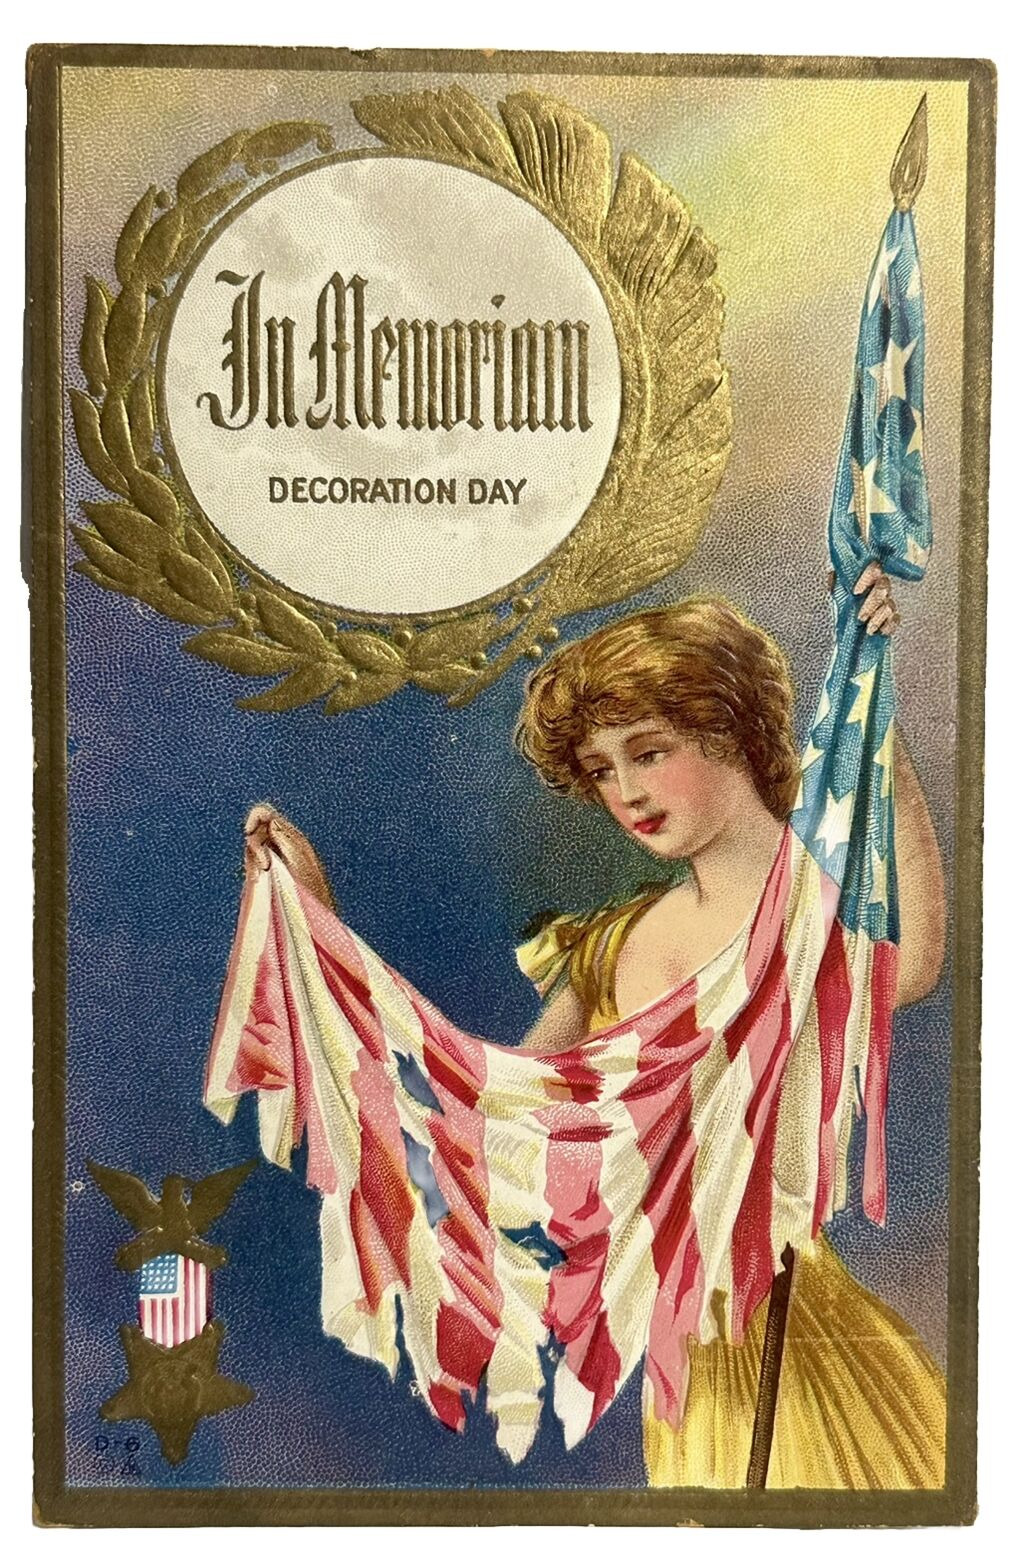 Decoration Day GAR Postcard Patriotic In Memoriam Lady Holds Tattered USA Flag